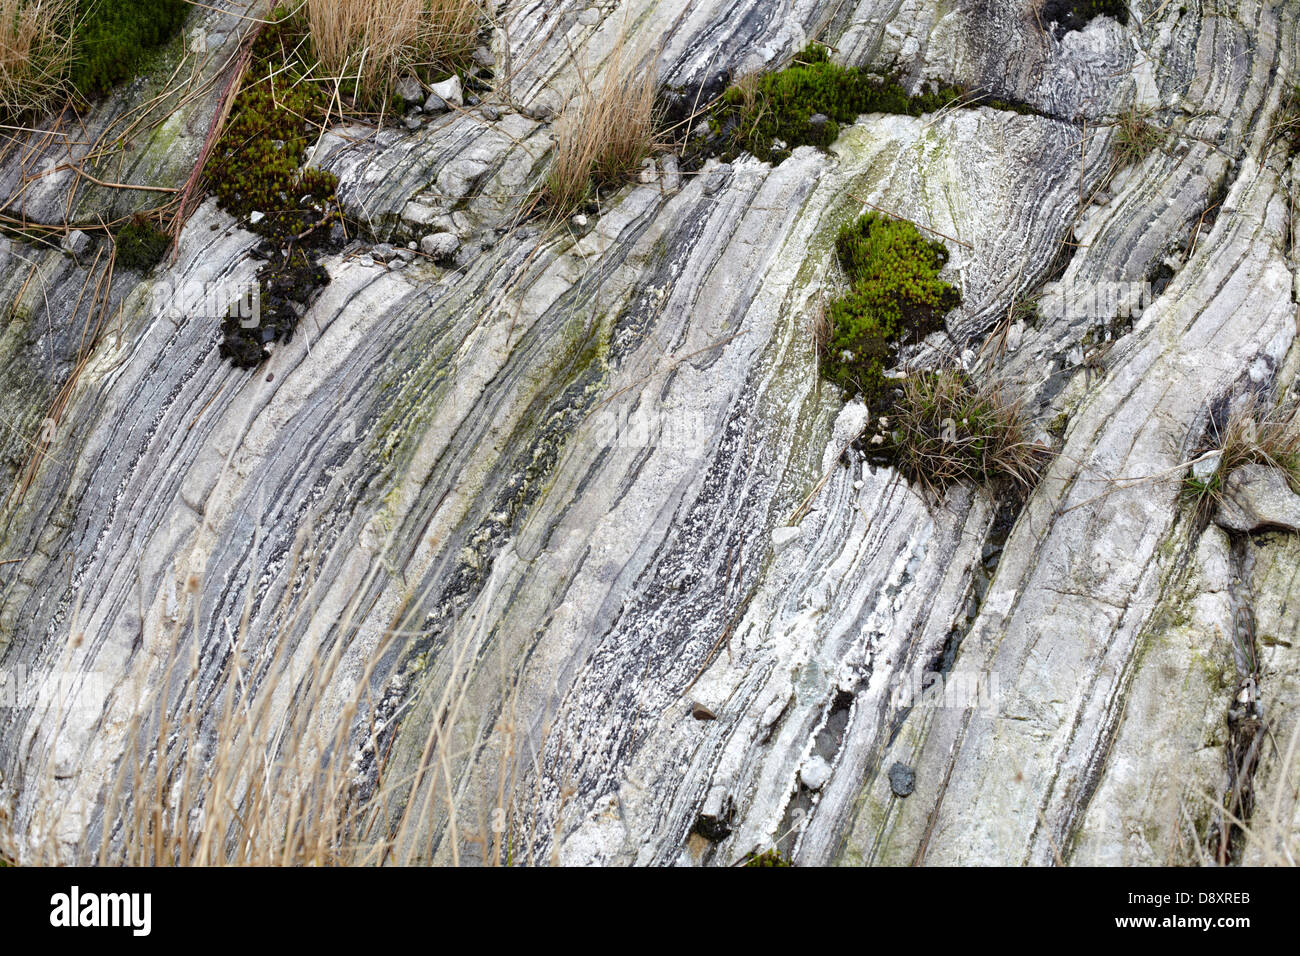 Forestry at Polloch and Loch Shiel. Rock layer formations Stock Photo